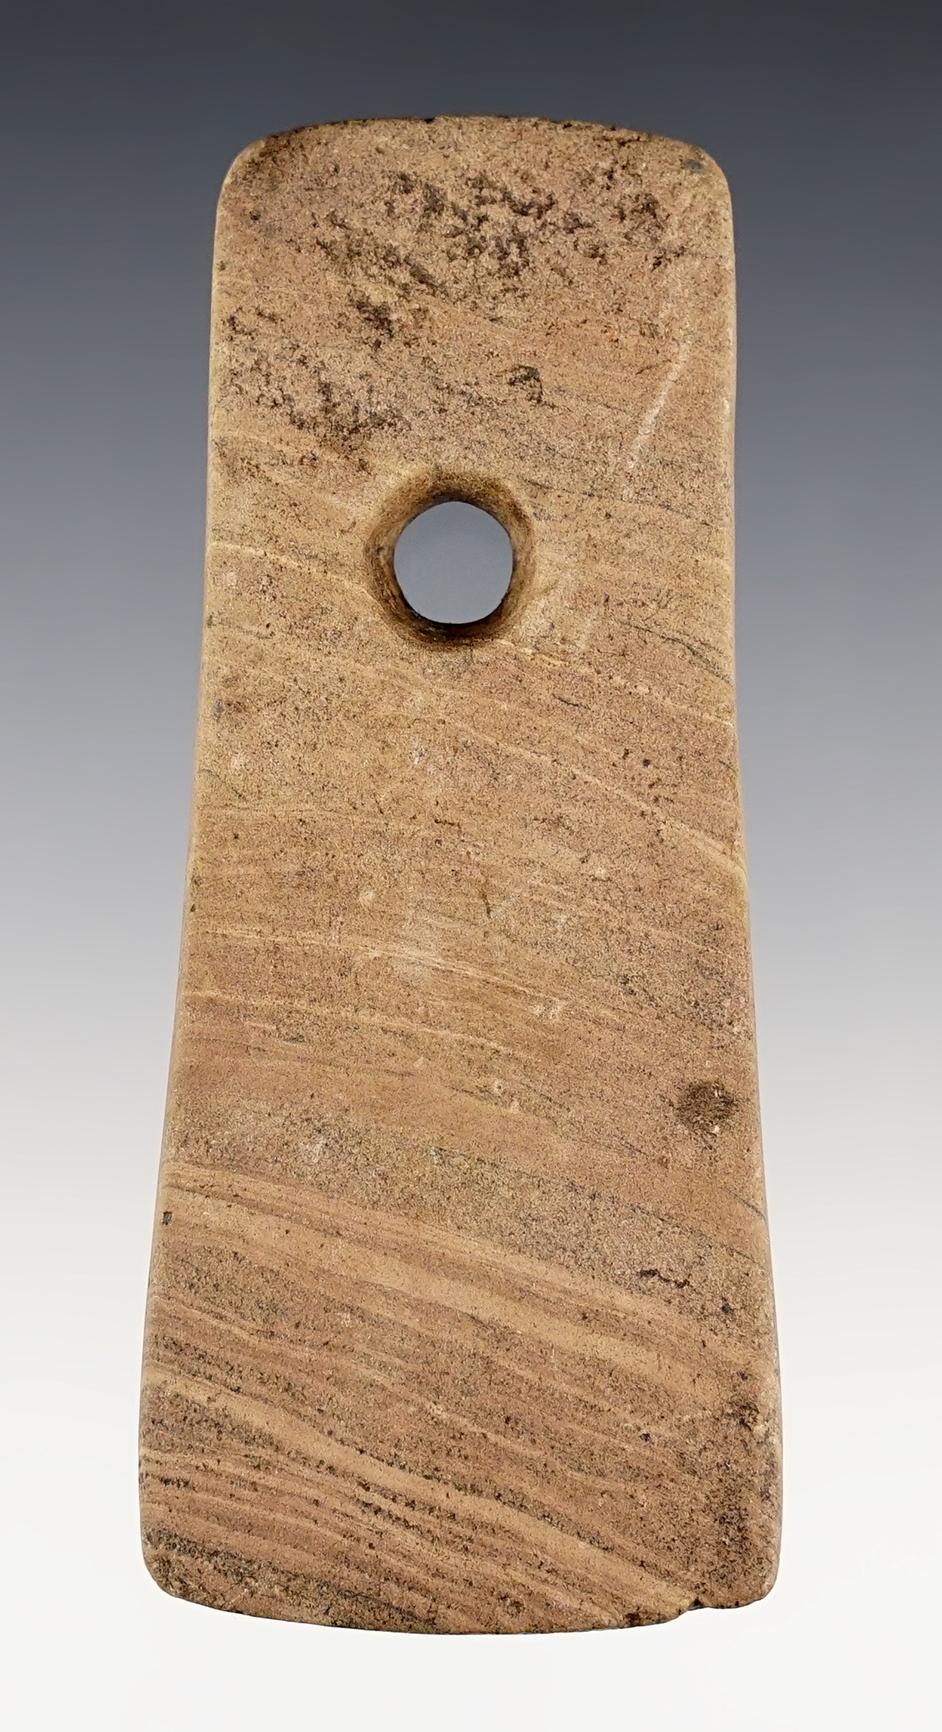 Nice 4 1/16" Trapezoidal Pendant found in Wood Co., Ohio with faint tally marks on the top.